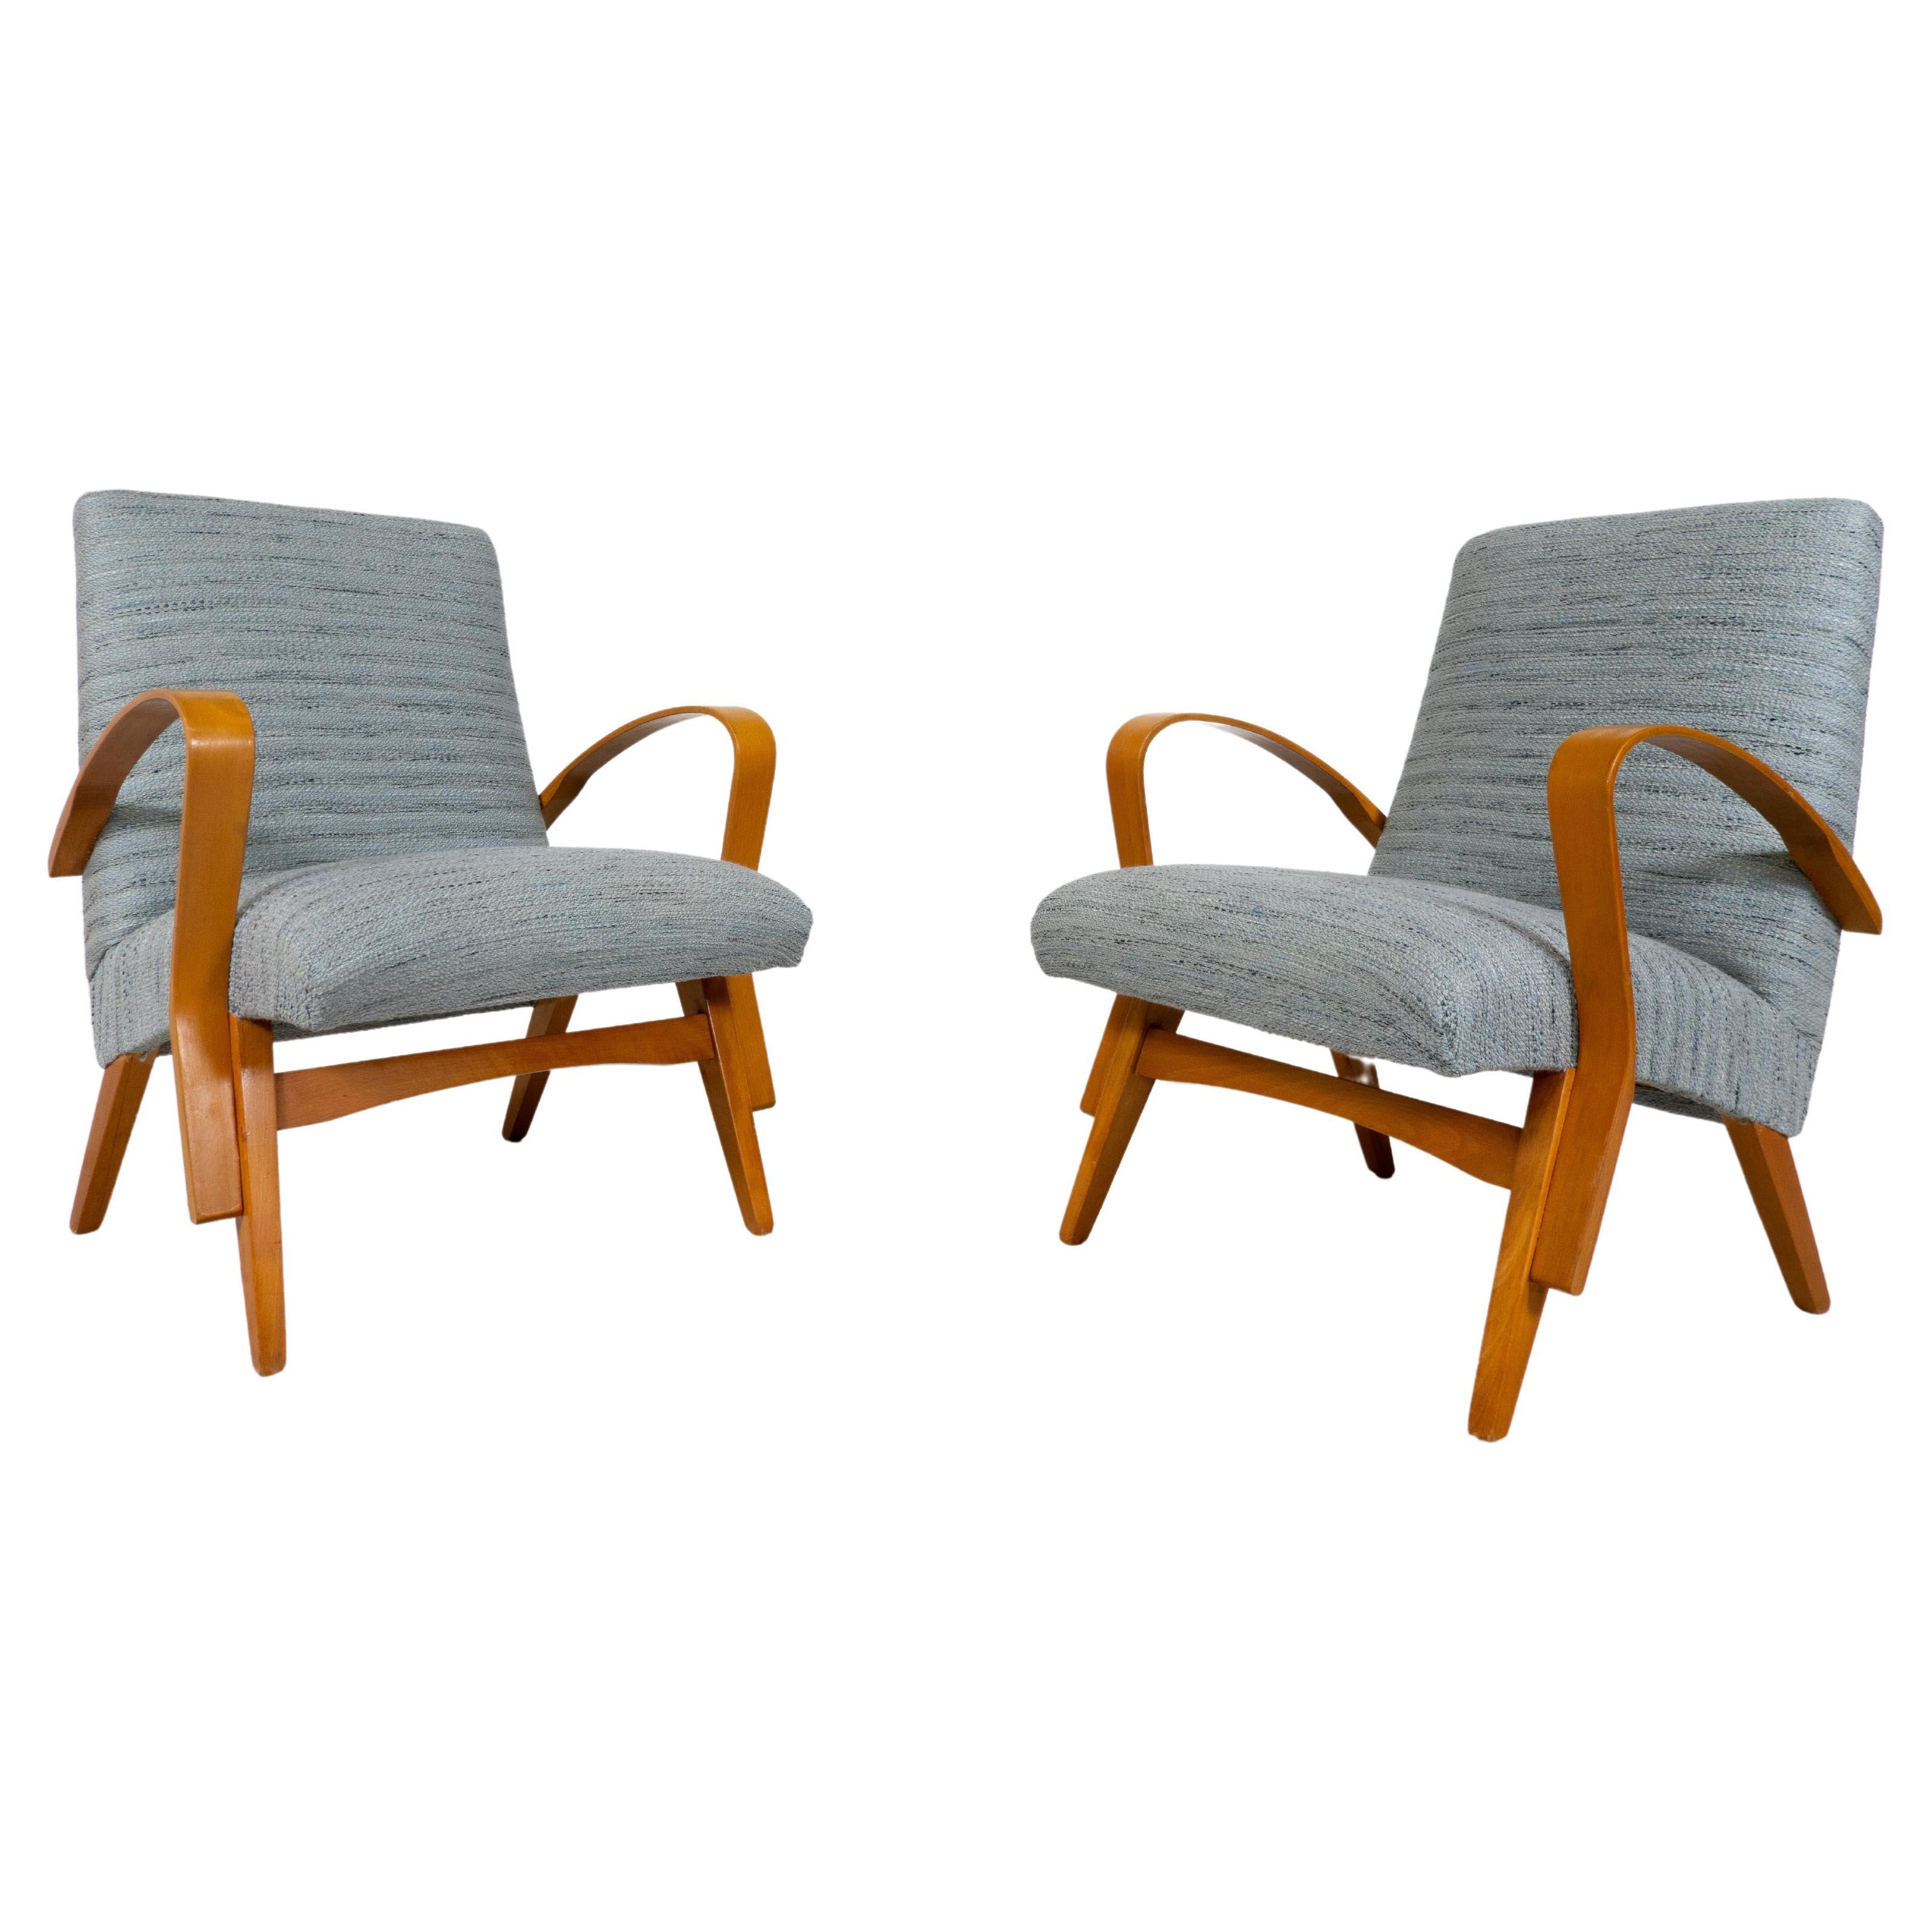 Mid-Century Modern Pair of Armchairs, 1950s, Czech Republic (New Uphostery) For Sale